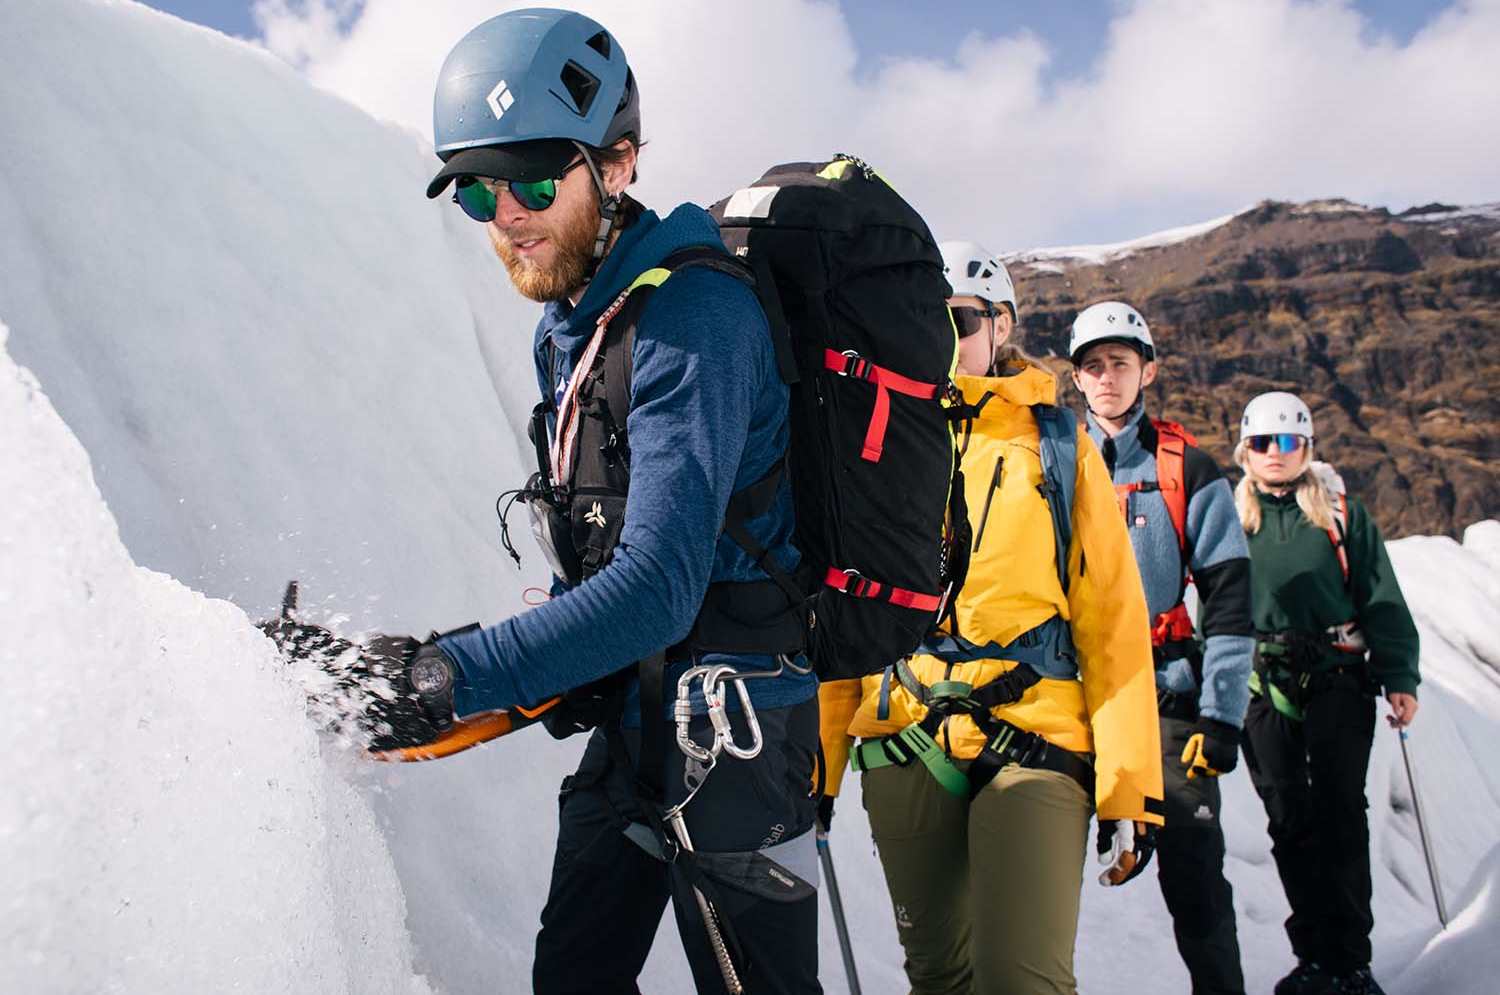 Ice climbing experience with a professional glacier guide